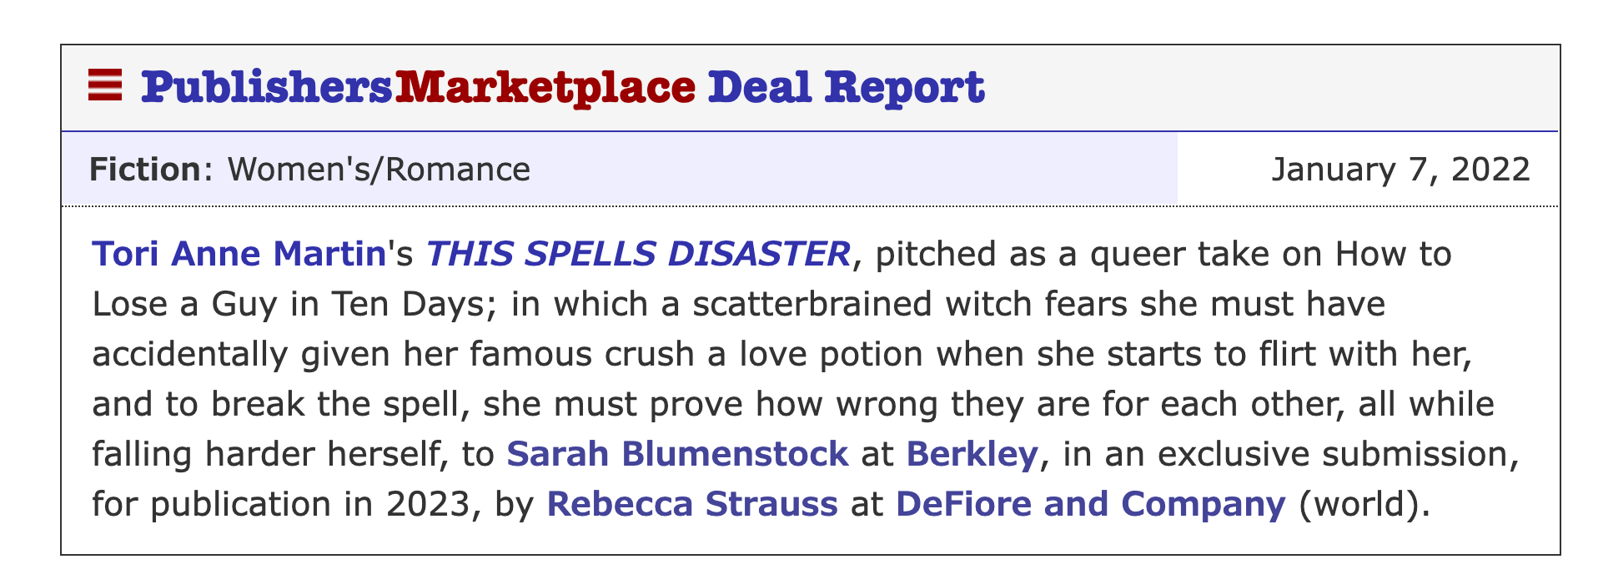 Summary for This Spells Disaster reads: pitched as a queer take on How to Lose a Guy in Ten Days; in which a scatterbrained witch fears she must have accidentally given her famous crush a love potion when she starts to flirt with her, and to break the spell, she must prove how wrong they are for each other, all while falling harder herself.